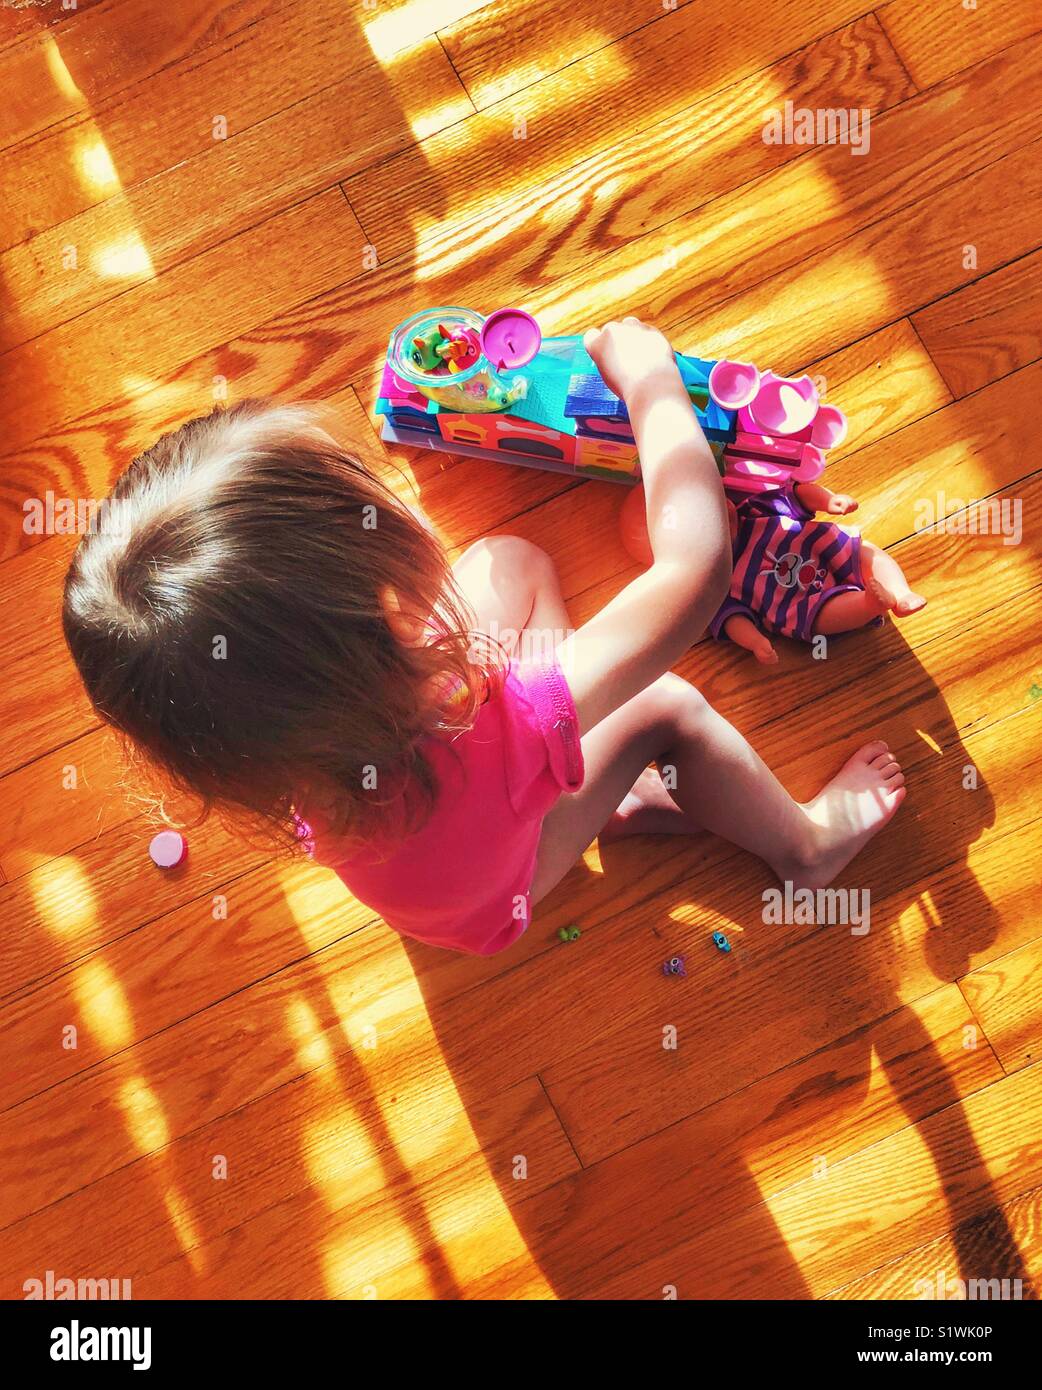 Toddler girl playing with toys on wooden floor with sunlight making a blinds pattern over her Stock Photo